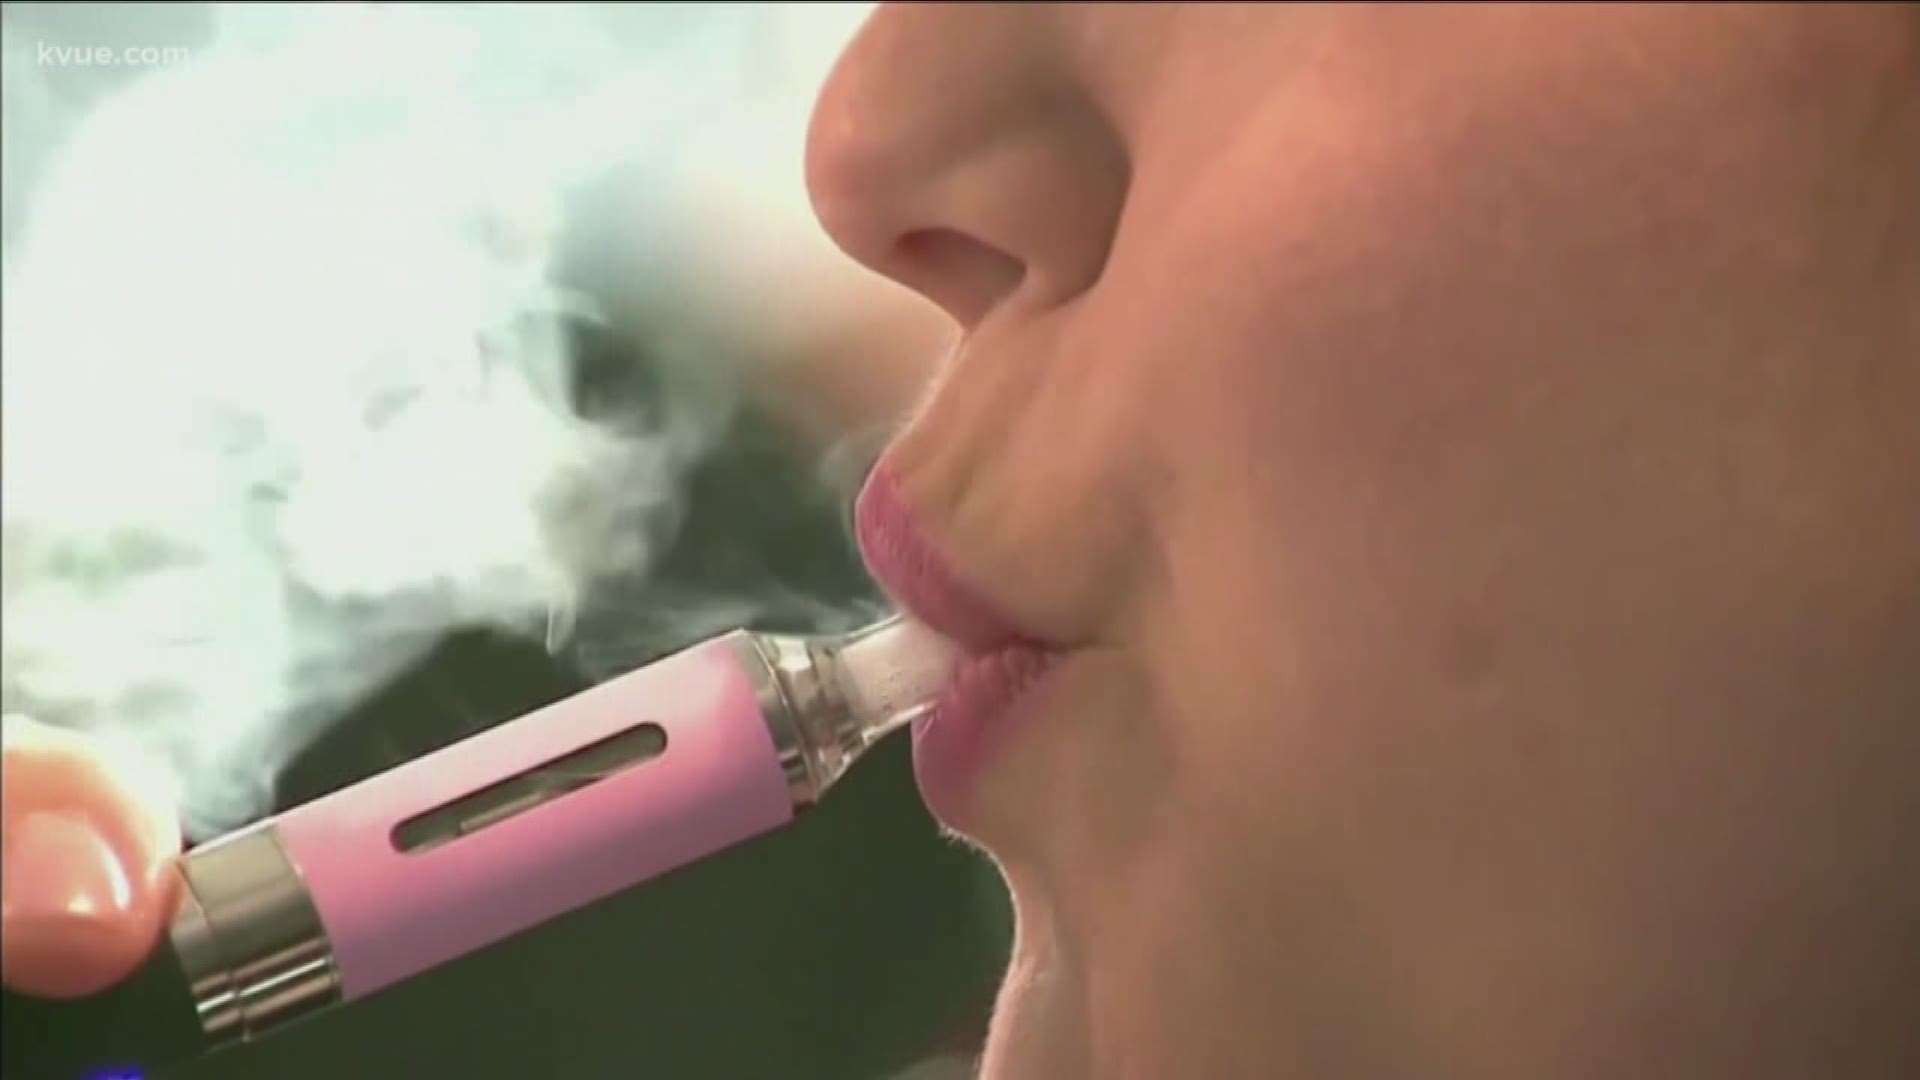 KVUE's Tori Larned spoke to medical professionals who said it's a good idea to start having a conversation with your teens about the dangers of vaping.